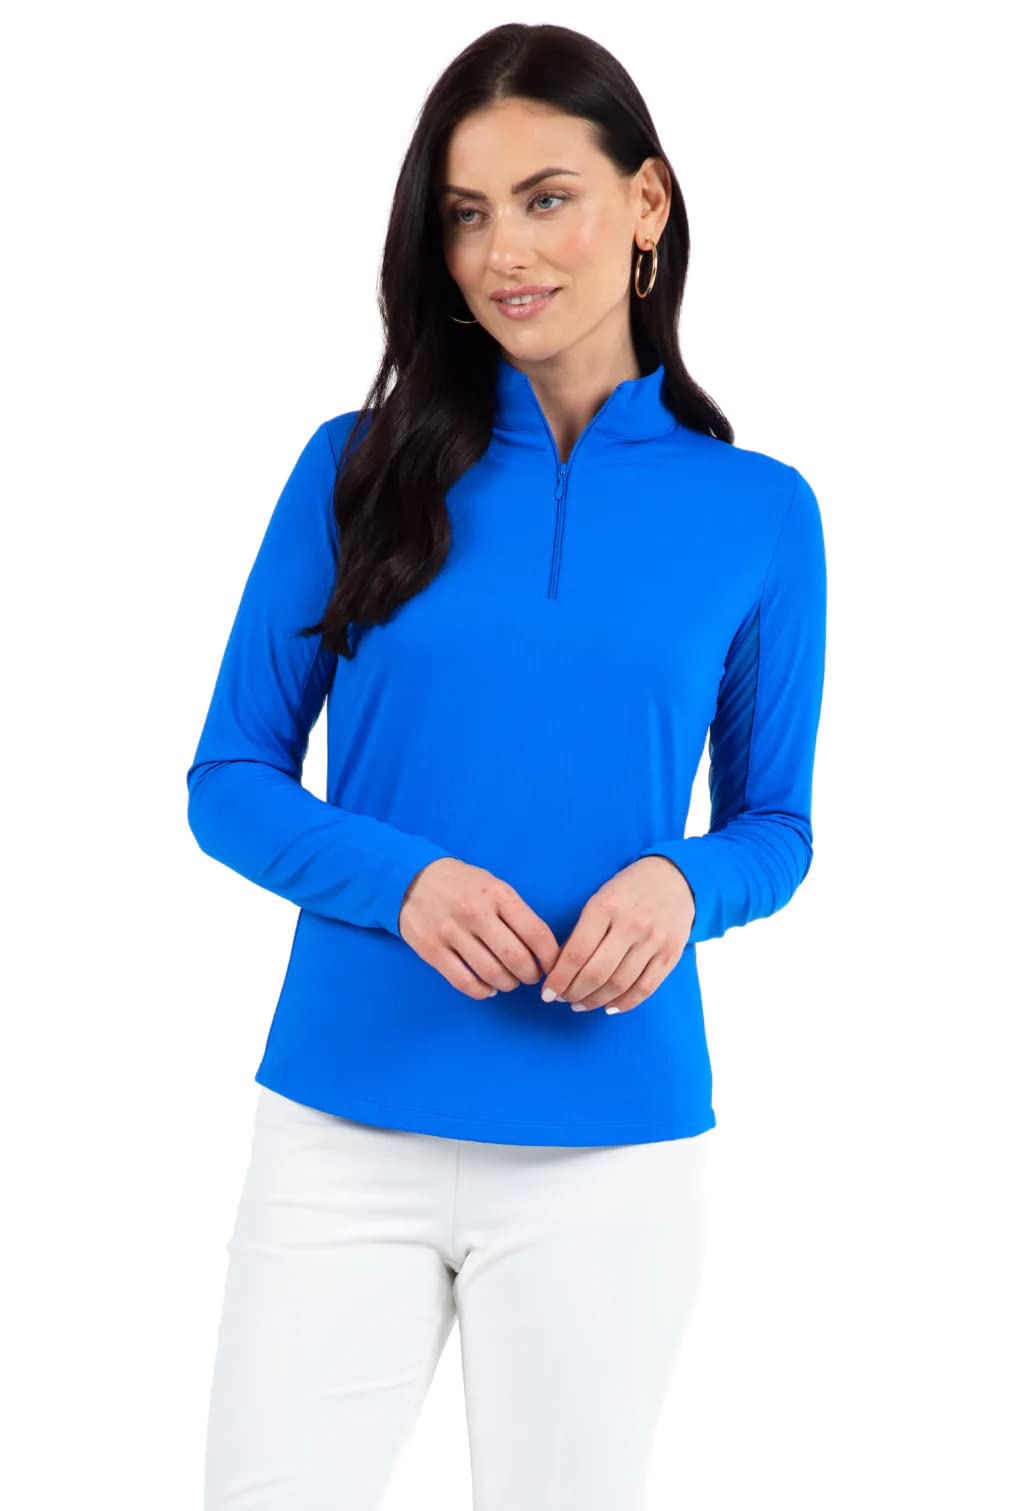 IBKUL Athleisure Wear Sun Protective UPF 50+ Icefil Cooling Tech Long Sleeve Mock Neck Top with Under Arm Mesh 80000 Blue Solid XL